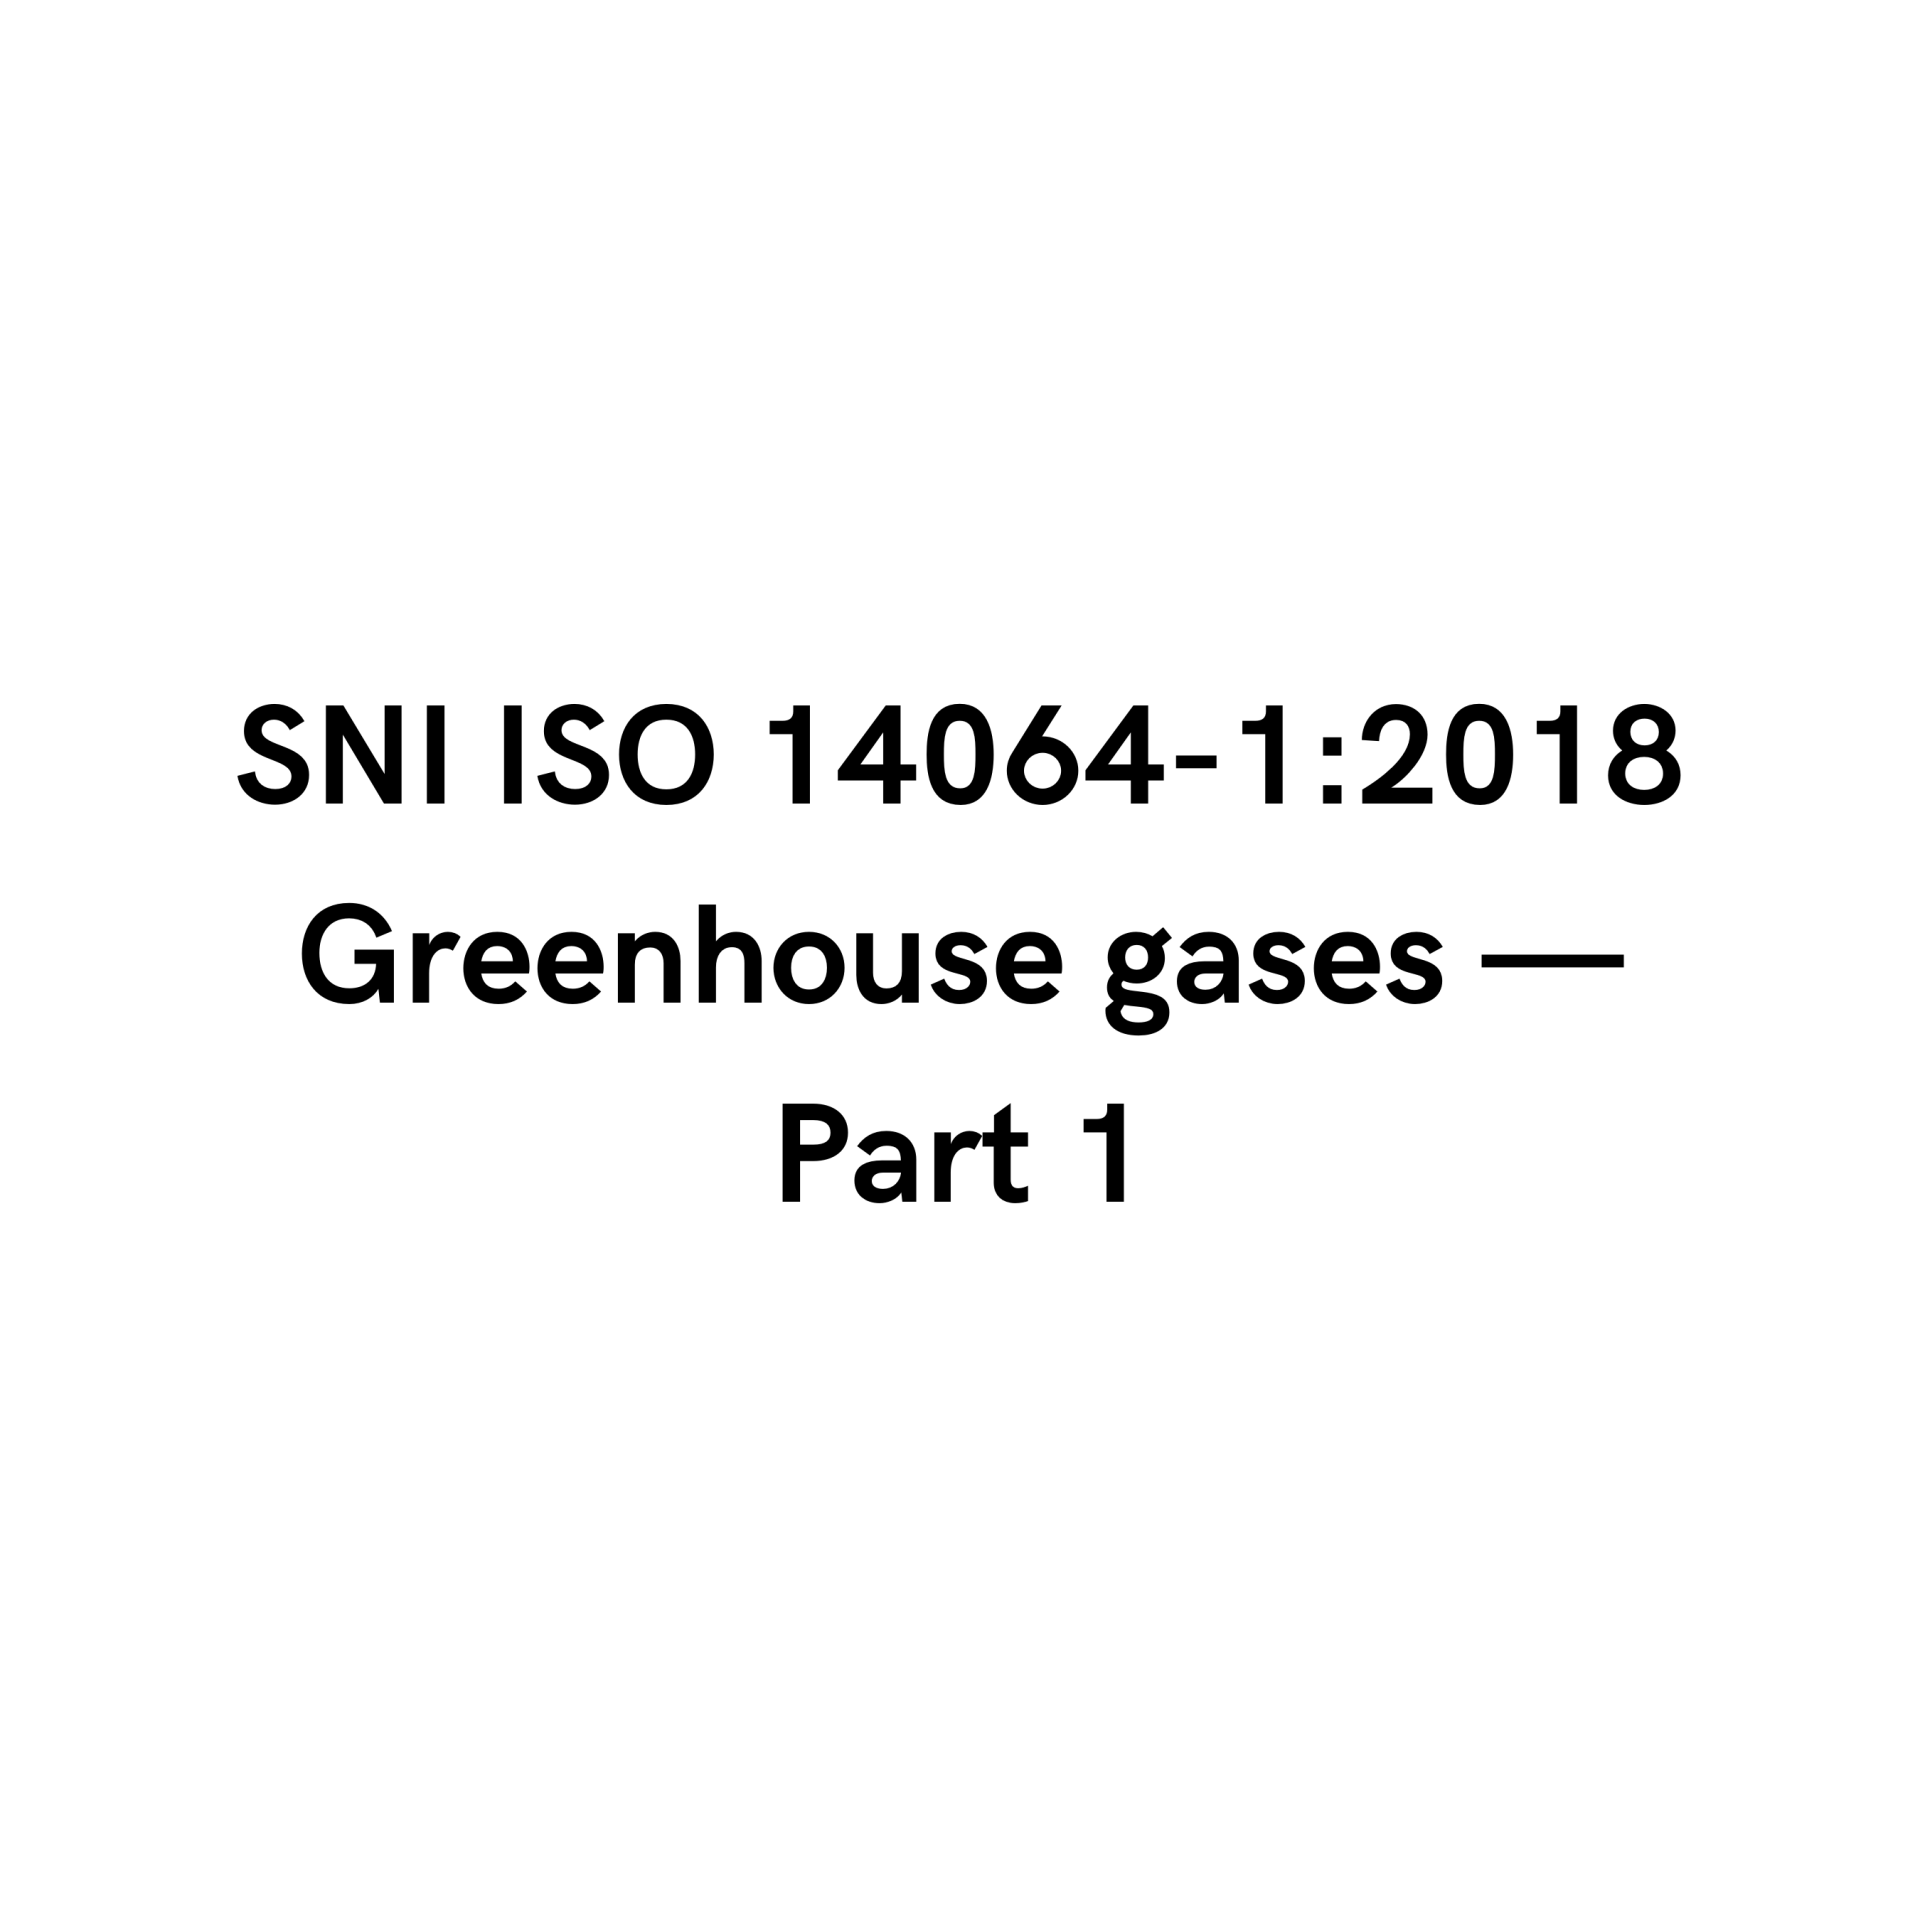 SNI ISO 14064-1:2018 Greenhouse gasses — Bagian 1